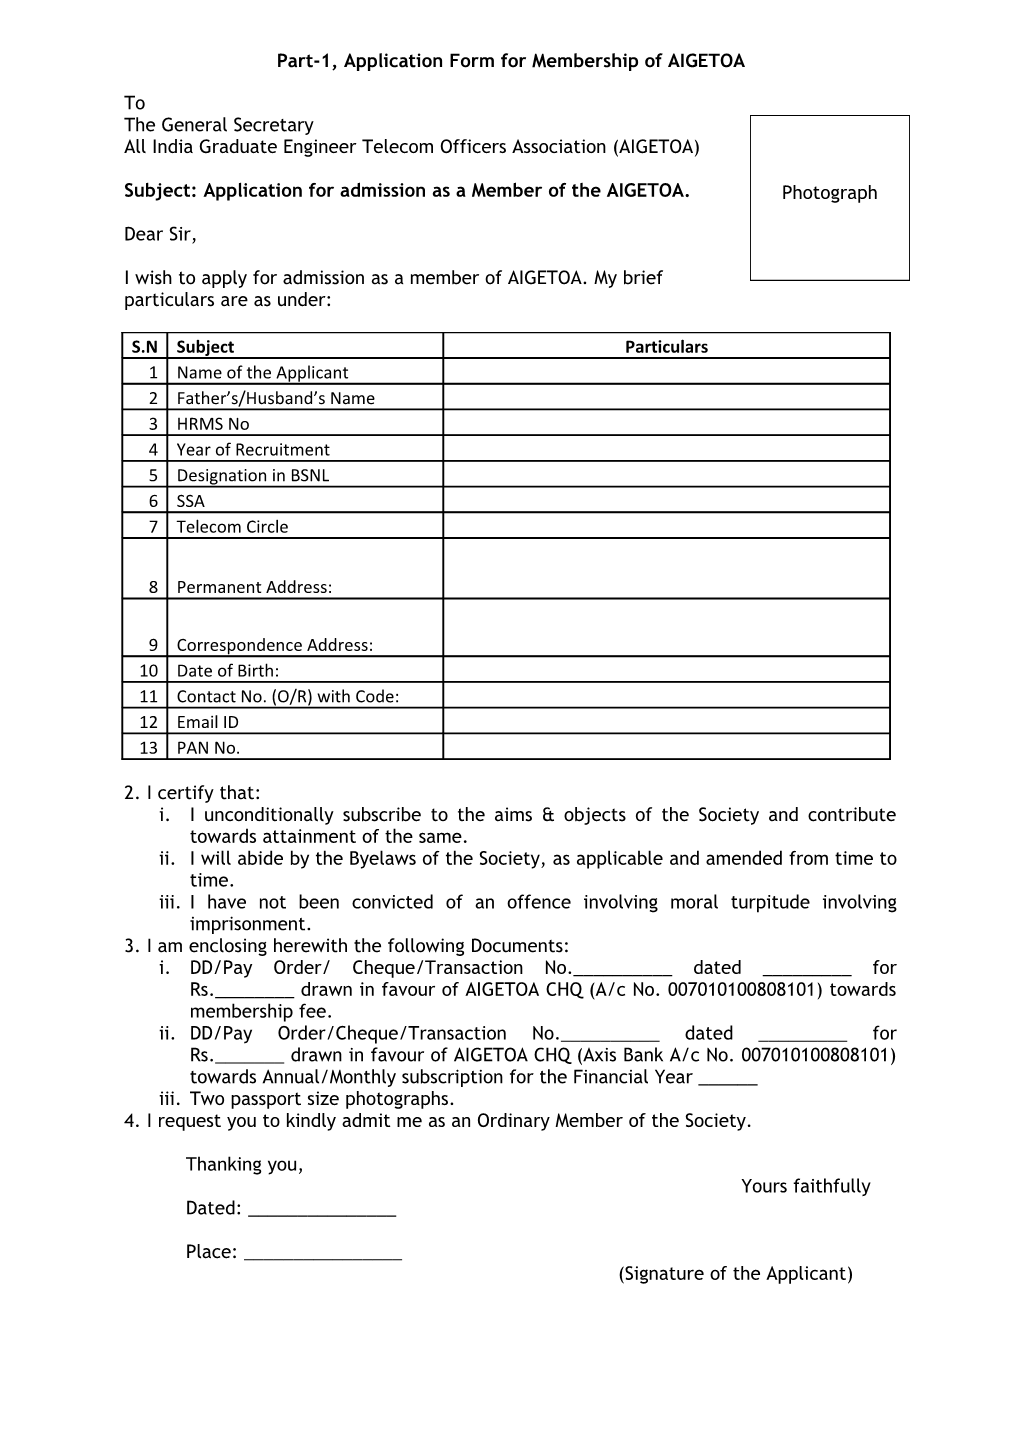 Part-1, Application Form for Membership of AIGETOA